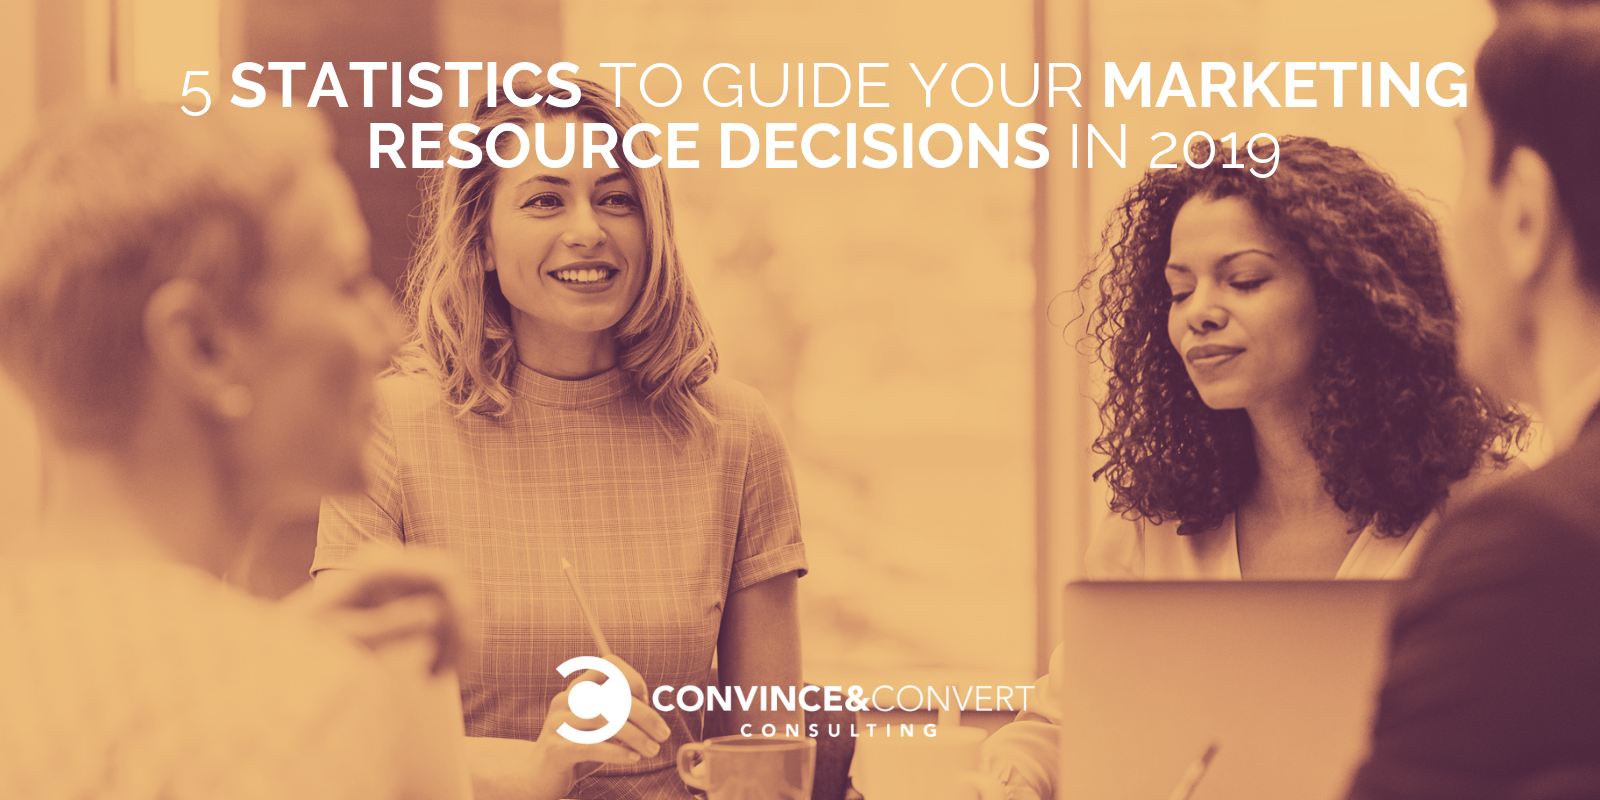 5 Statistics to Guide Your Marketing Resource Decisions in 2019